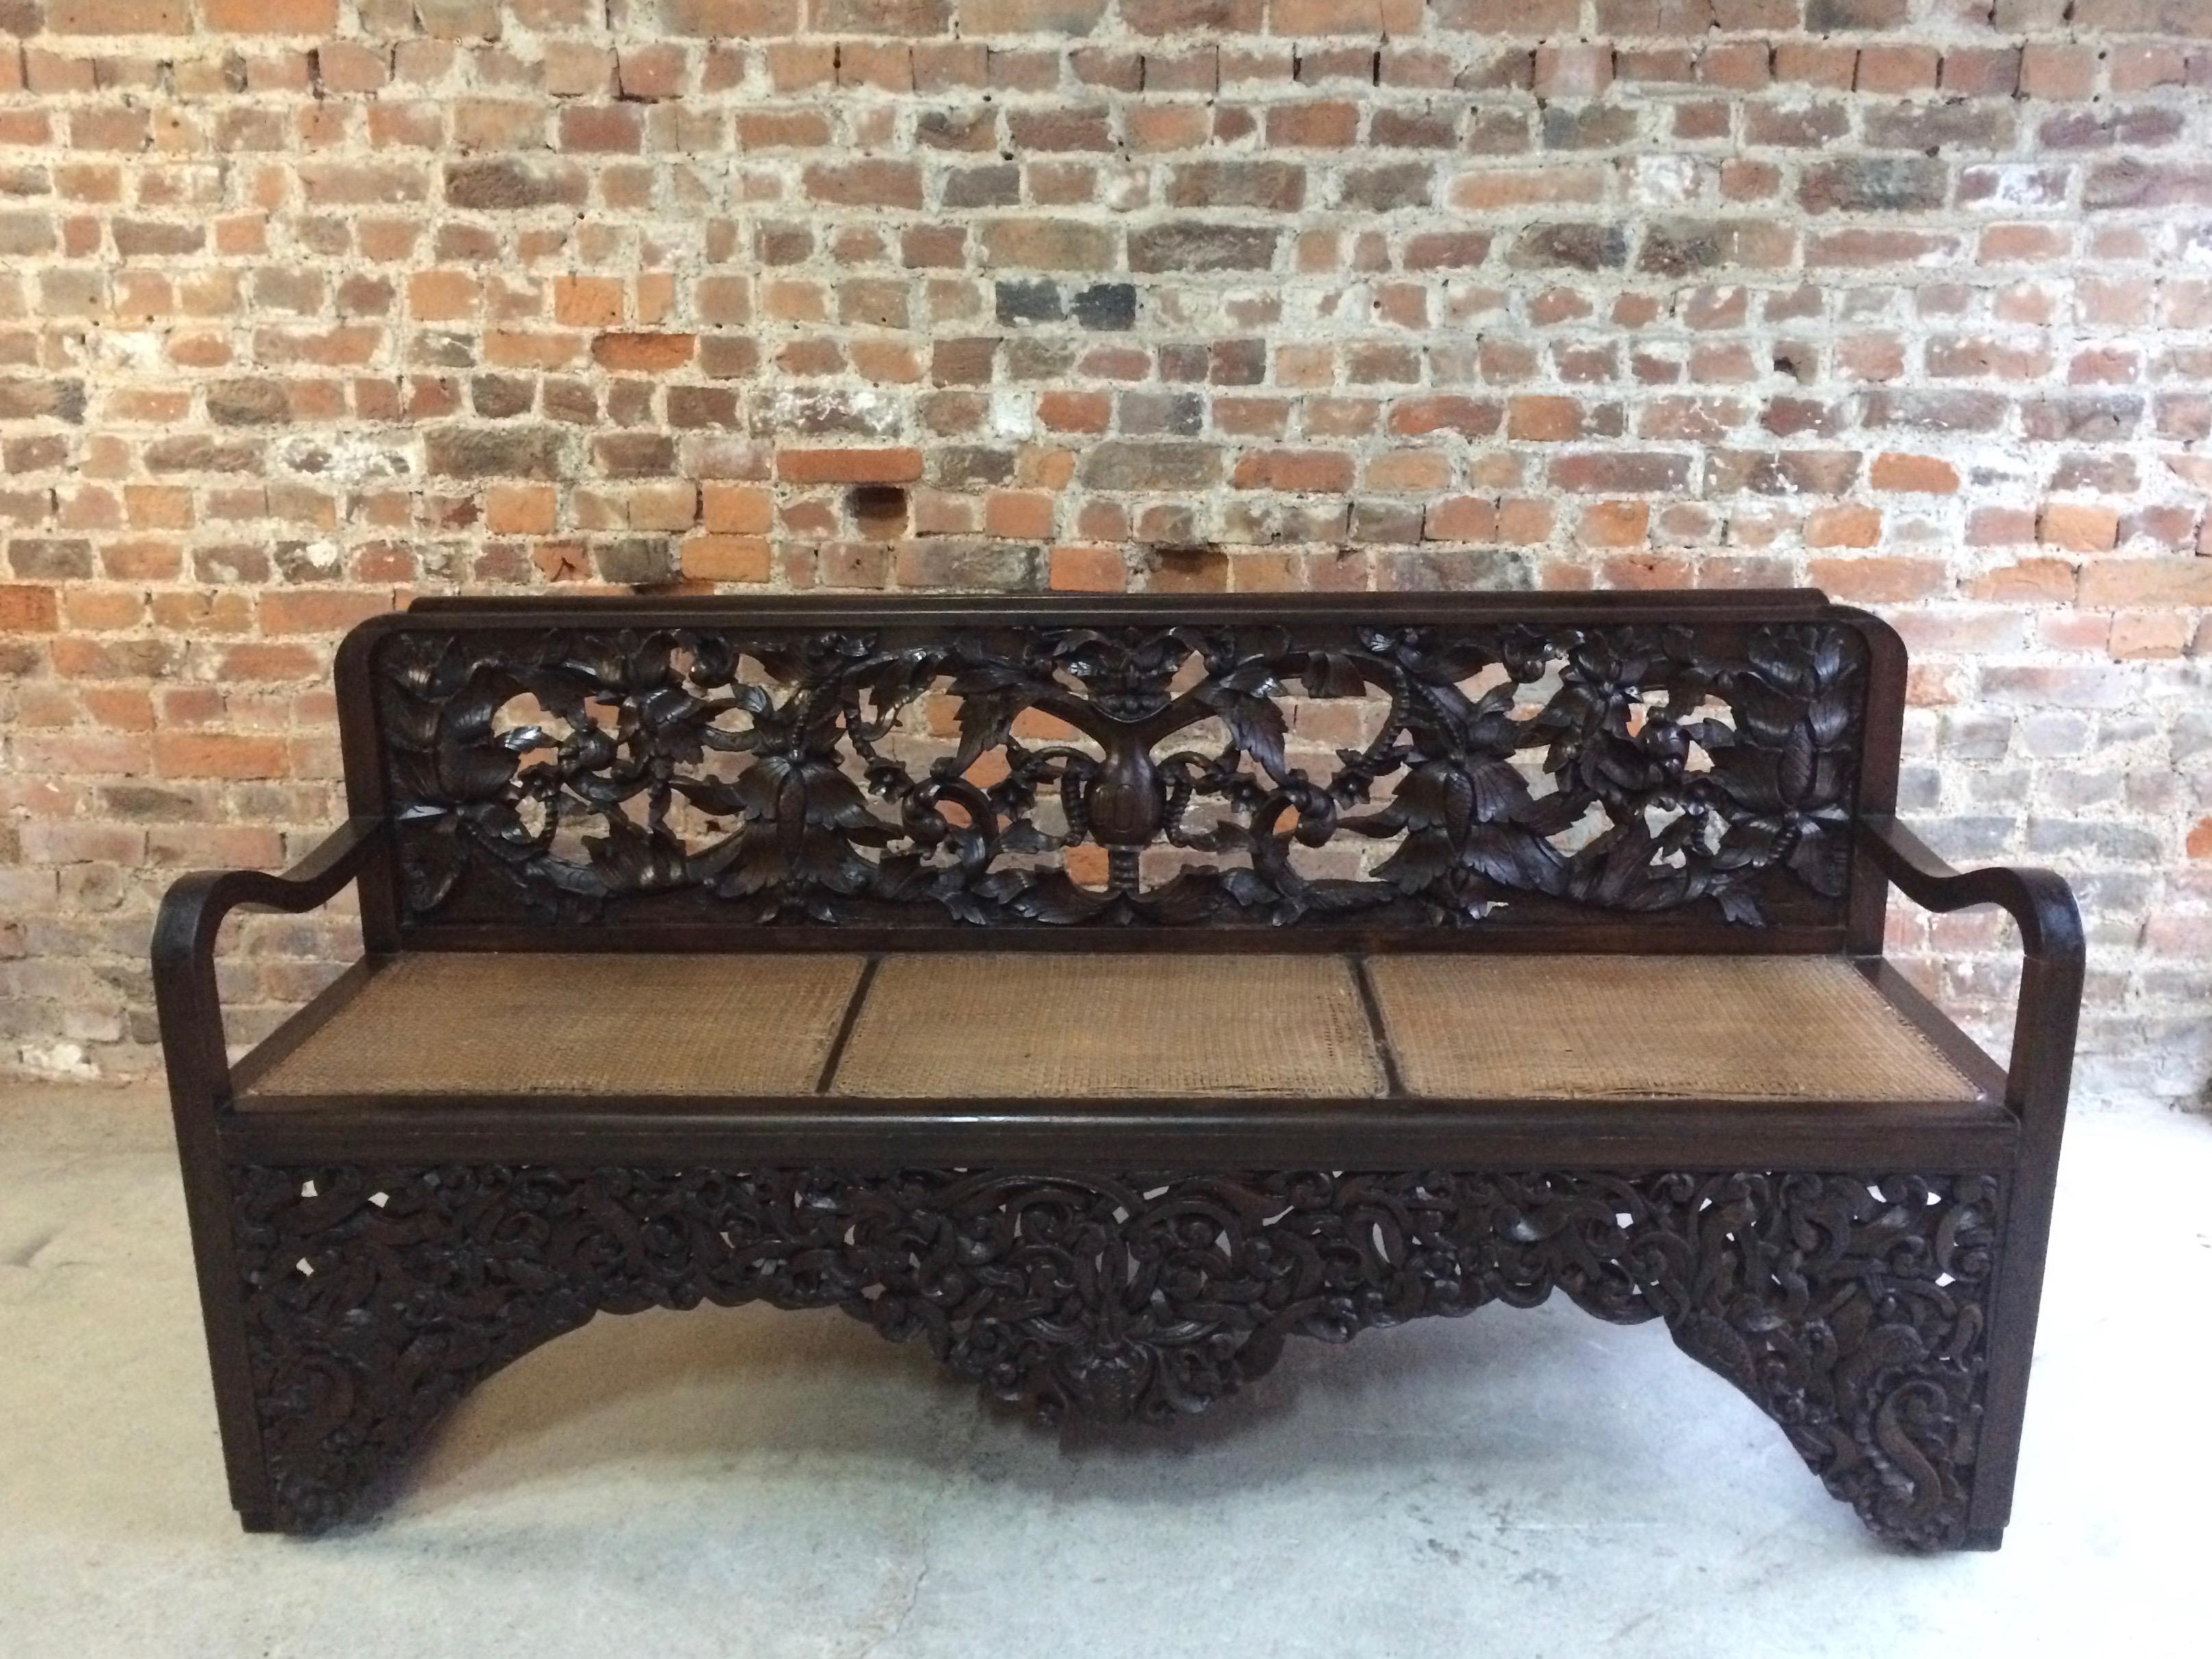 Early 20th Century Antique Bench Hall Seat Heavily Carved 20th Century 1900s Oriental Chinese